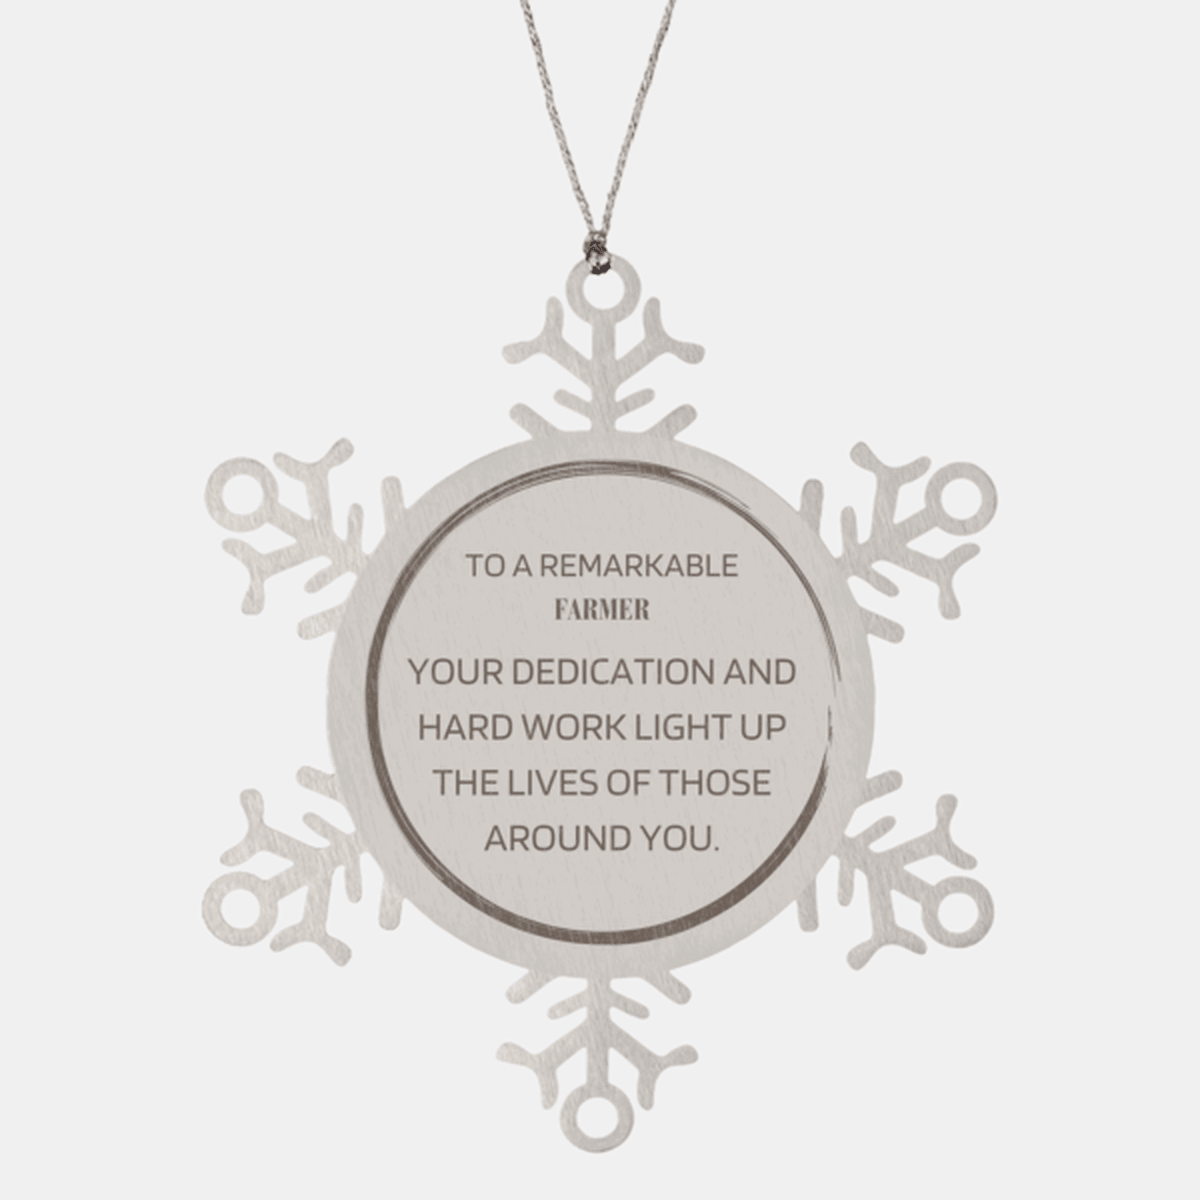 Remarkable Farmer Gifts, Your dedication and hard work, Inspirational Birthday Christmas Unique Snowflake Ornament For Farmer, Coworkers, Men, Women, Friends - Mallard Moon Gift Shop